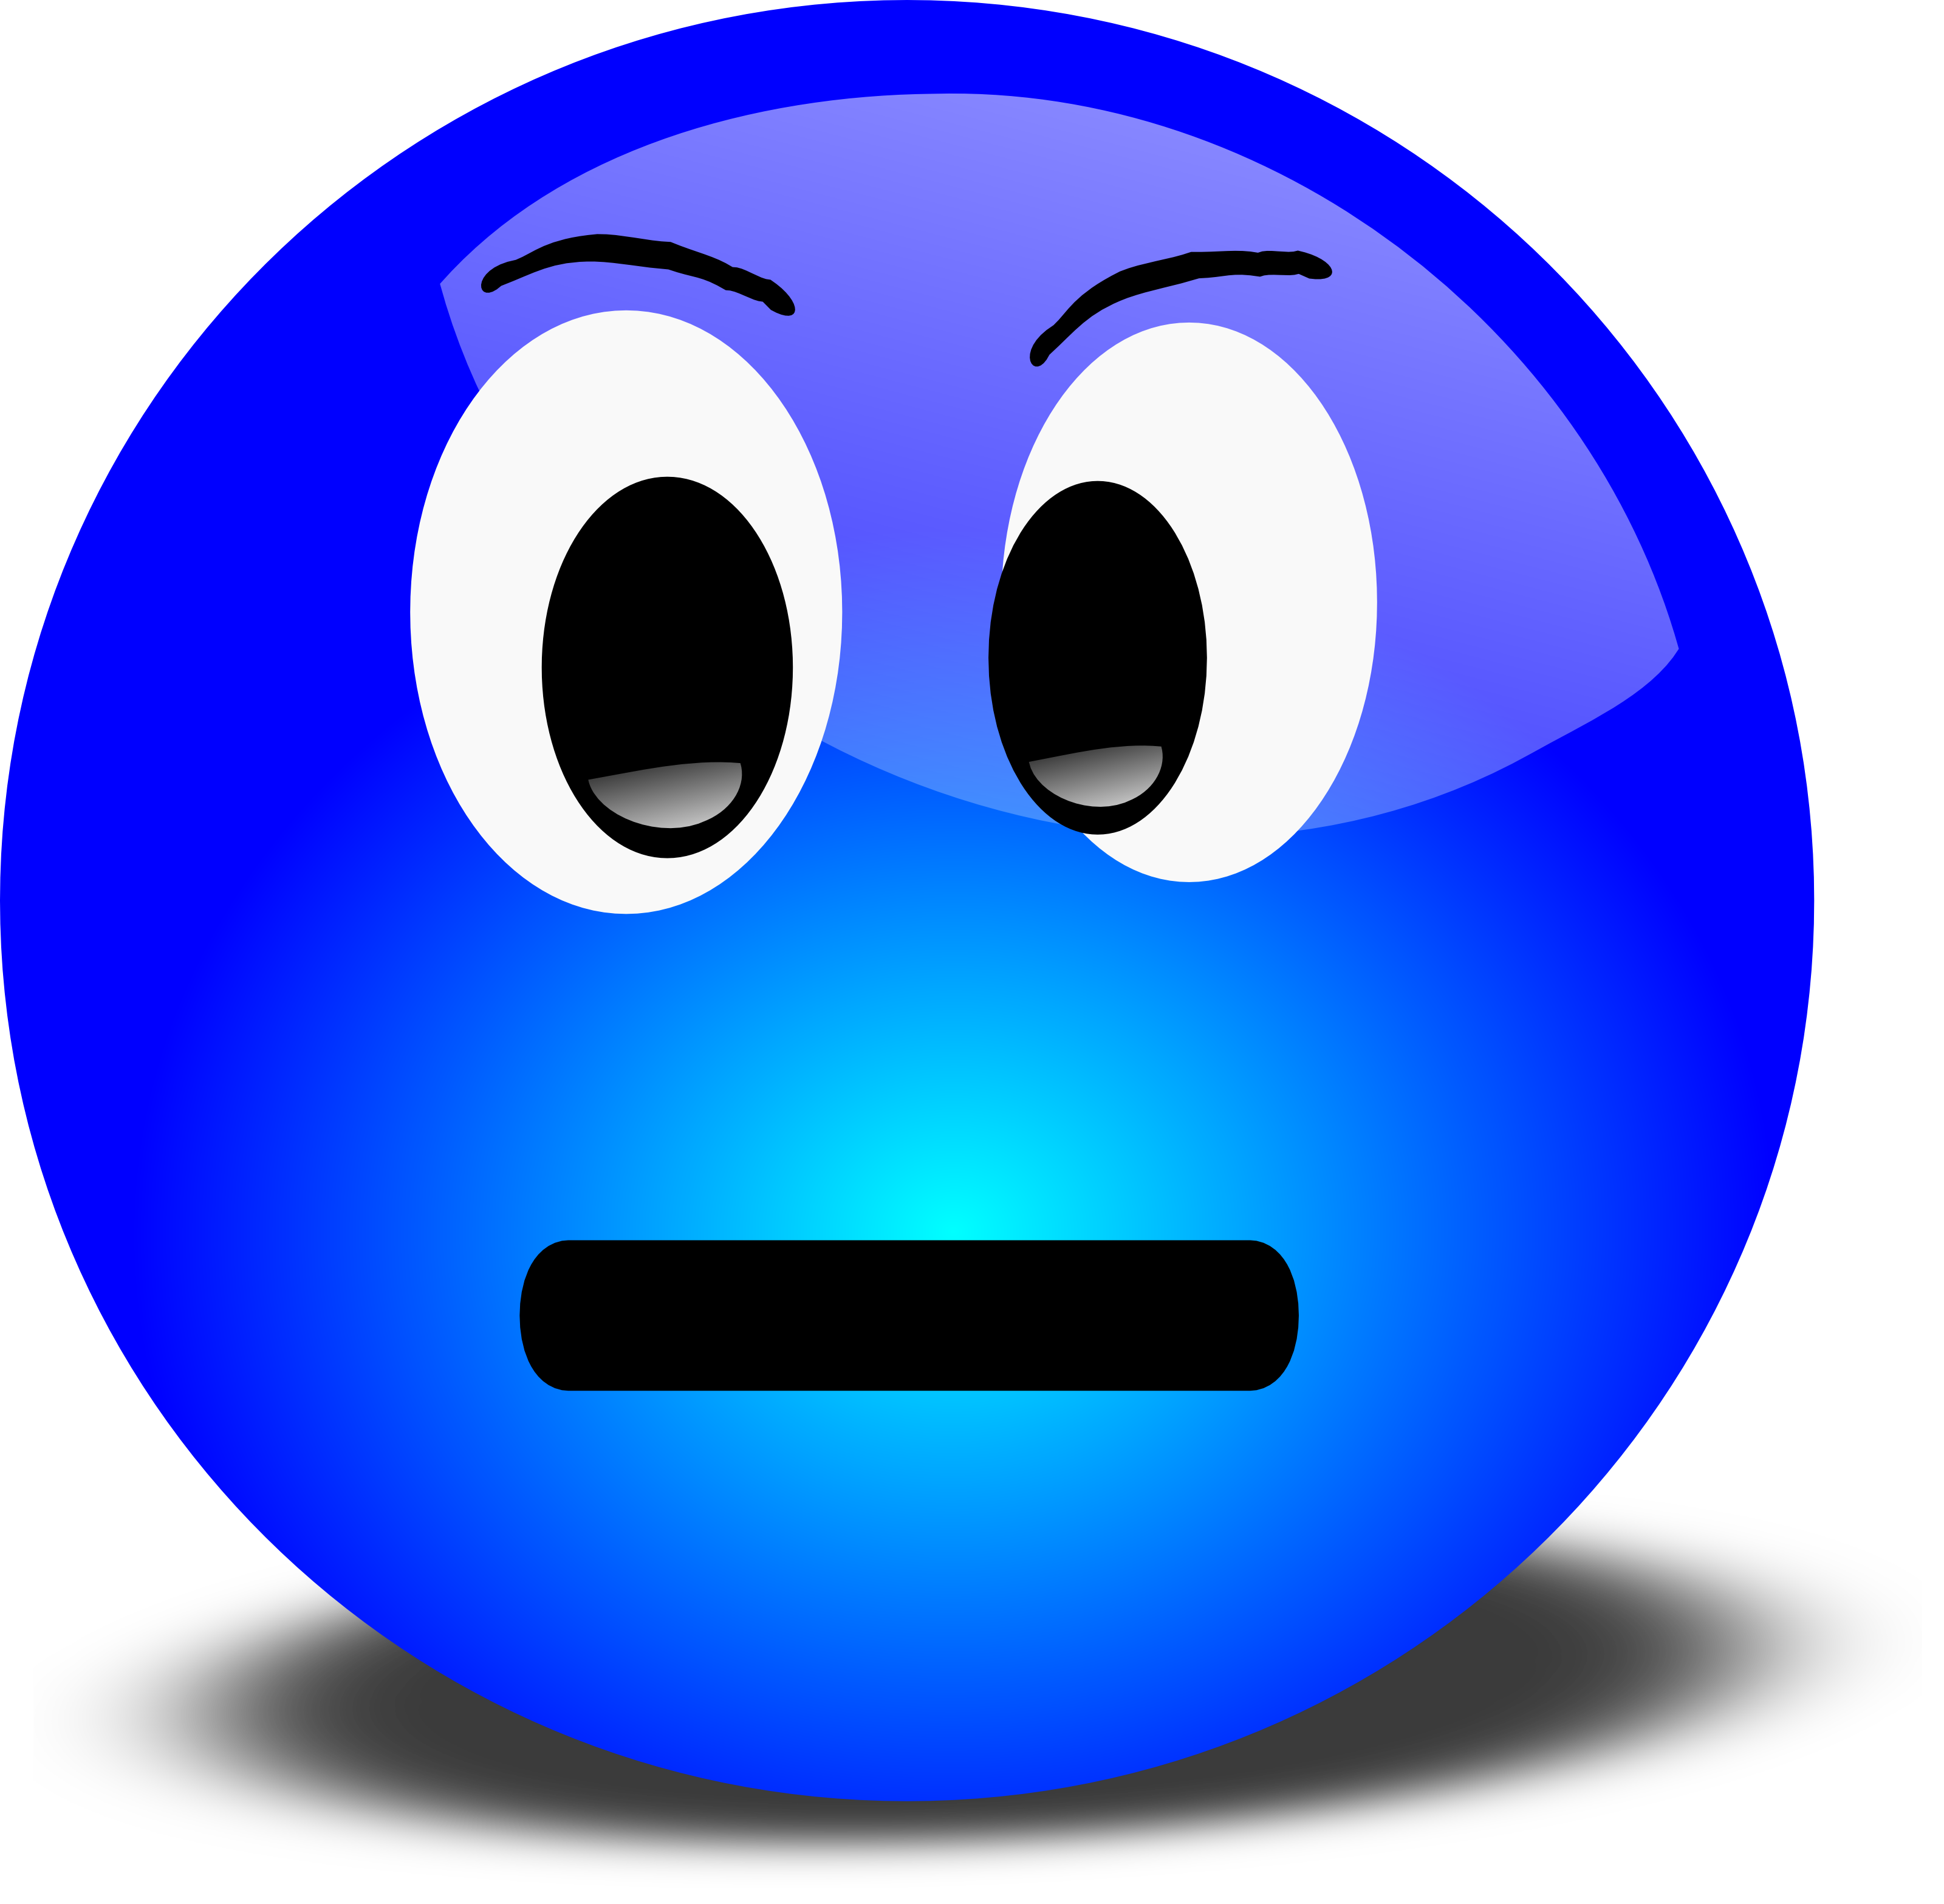 Smiley face clipart angry